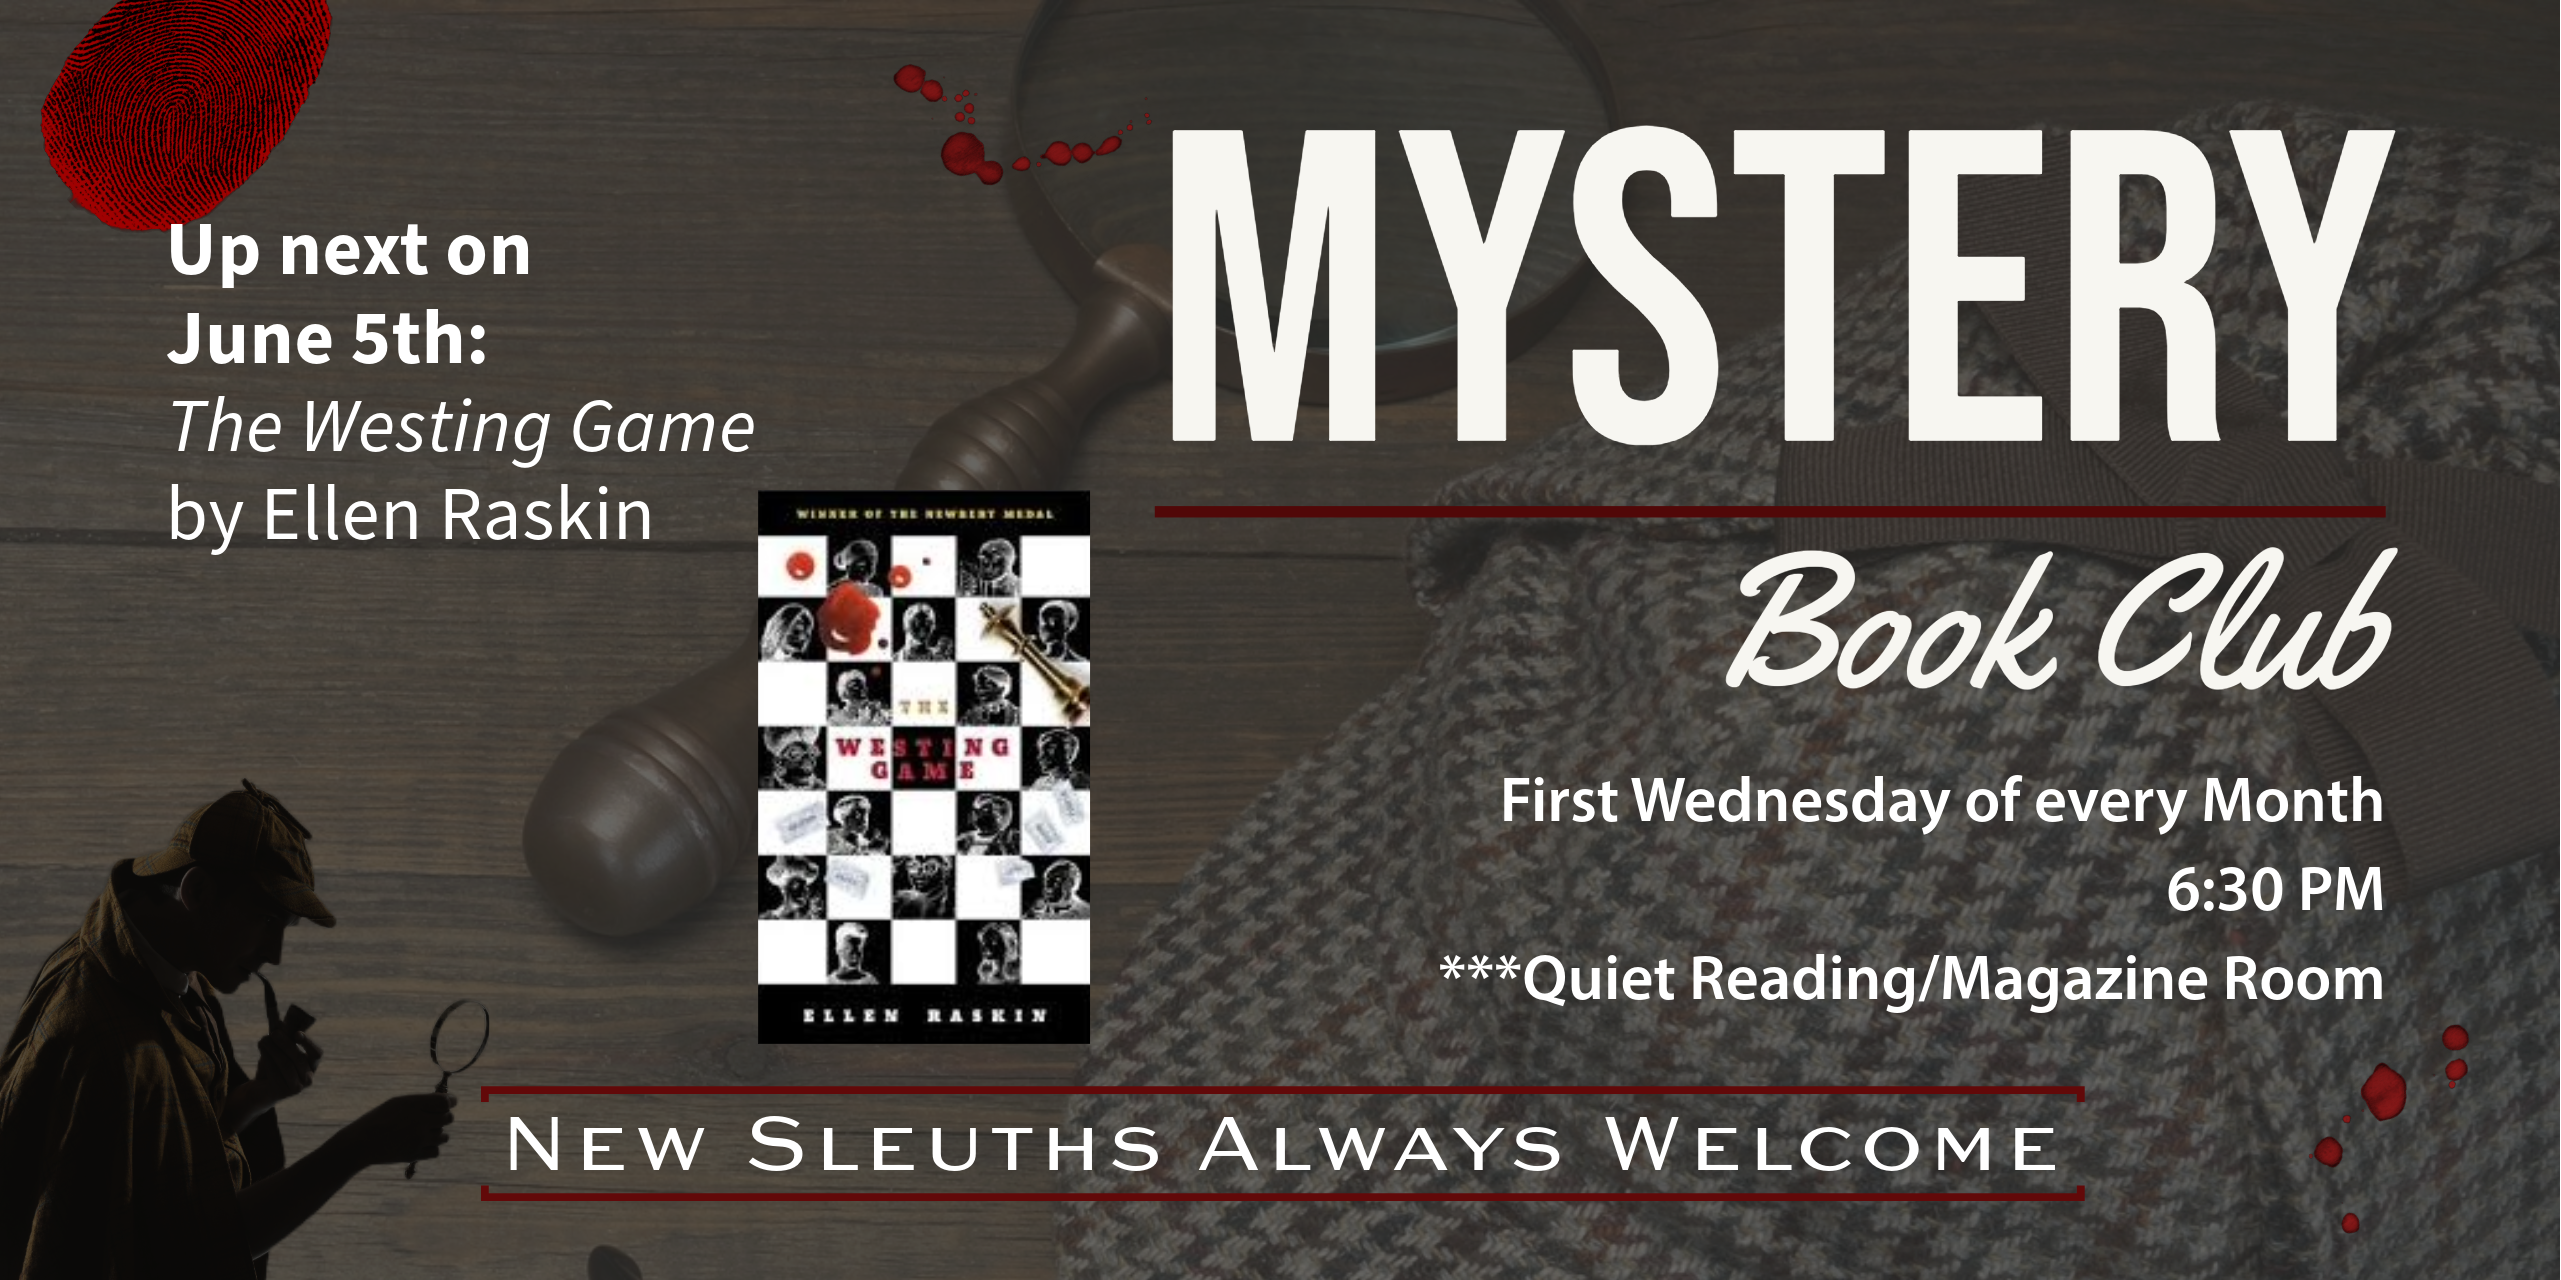 Mystery Book Club meets the first Wednesday of every month at 6:30 in the Library Community Room.  Up next is June 5, where we'll discuss "The Westing Game" by Ellen Raskin